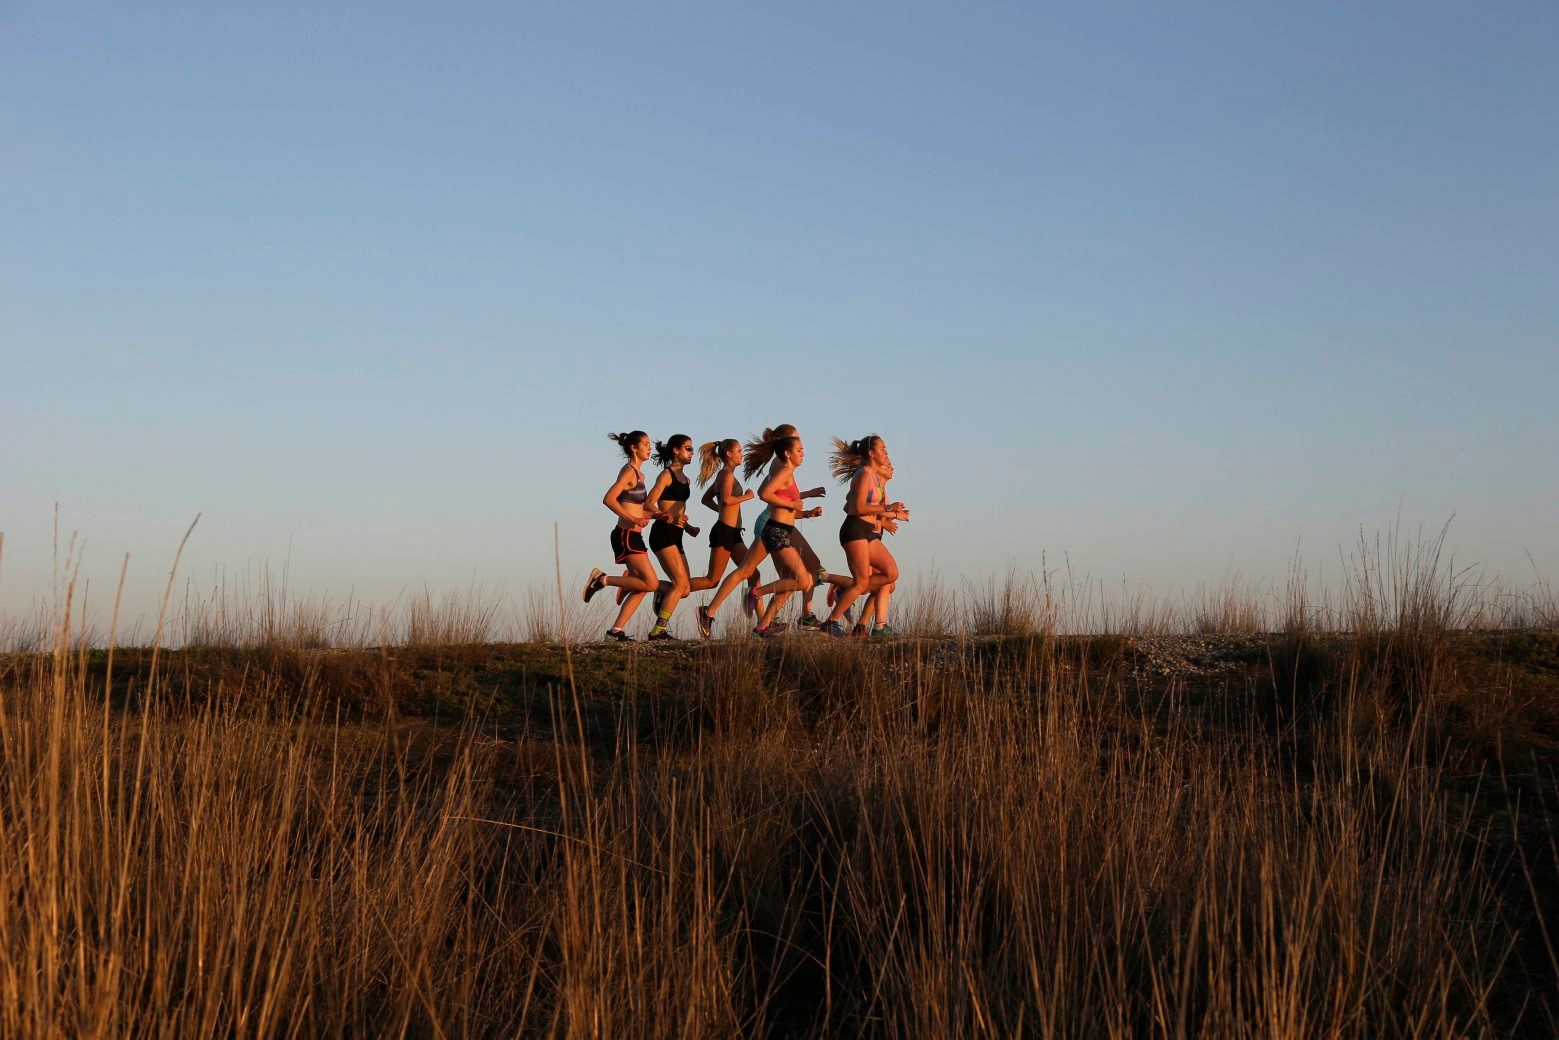 Joggers form a group along a trail as the sun sets at the Baylands Nature Preserve Tuesday, Jan. 6, 2015, in Palo Alto, Calif. Temperatures in the area for Tuesday ranged from the mid 40s to the upper 60s Fahrenheit. (AP Photo/Marcio Jose Sanchez) California Daily Life